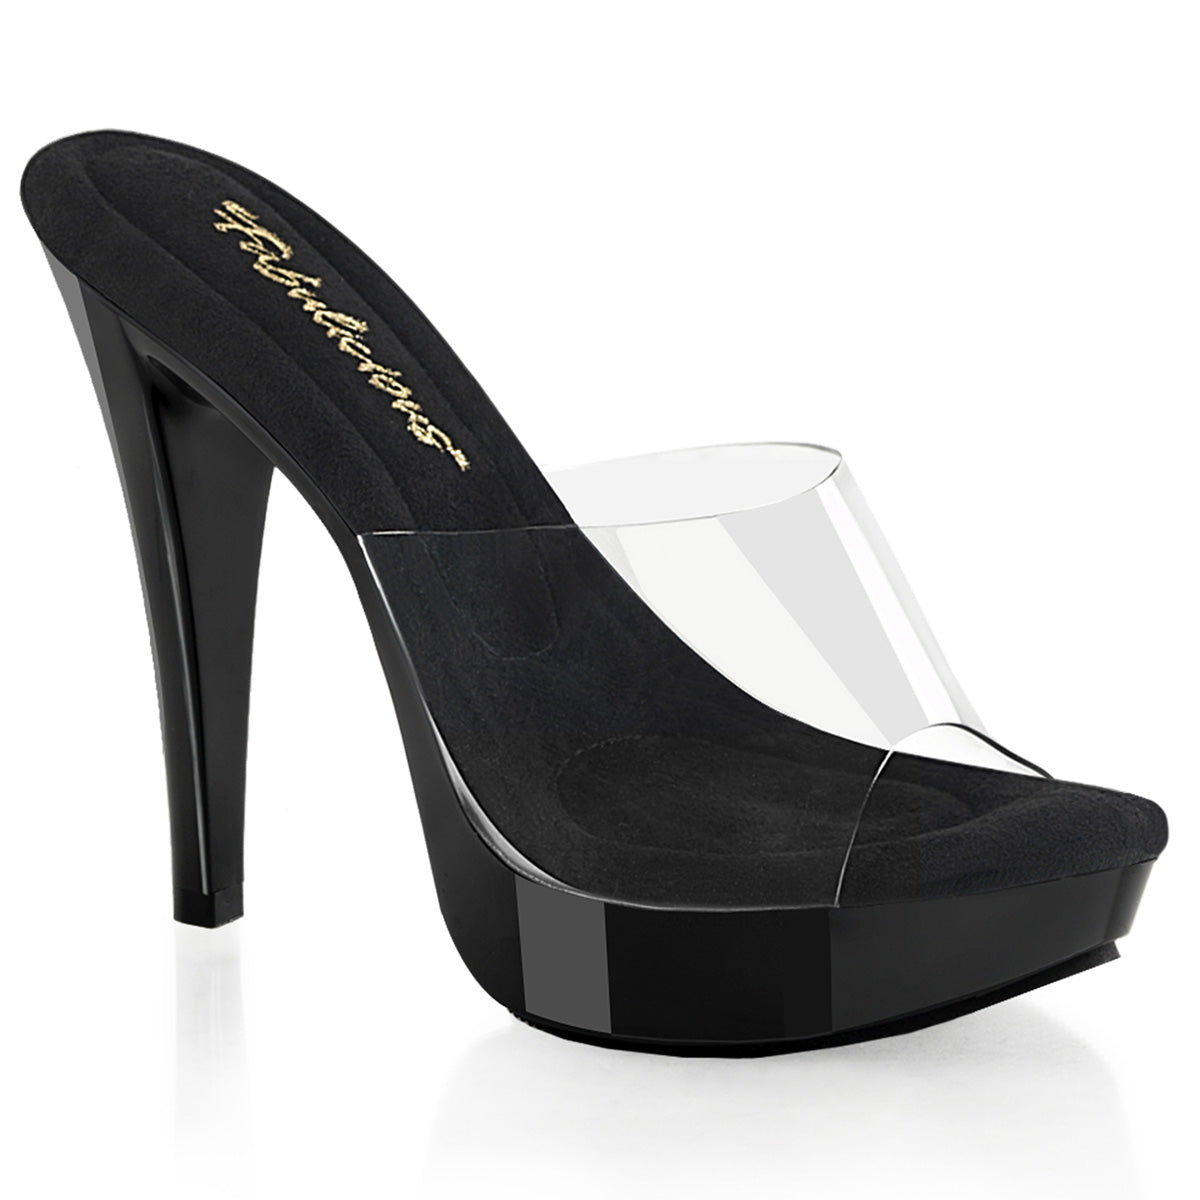 COCKTAIL-501 clear Heels